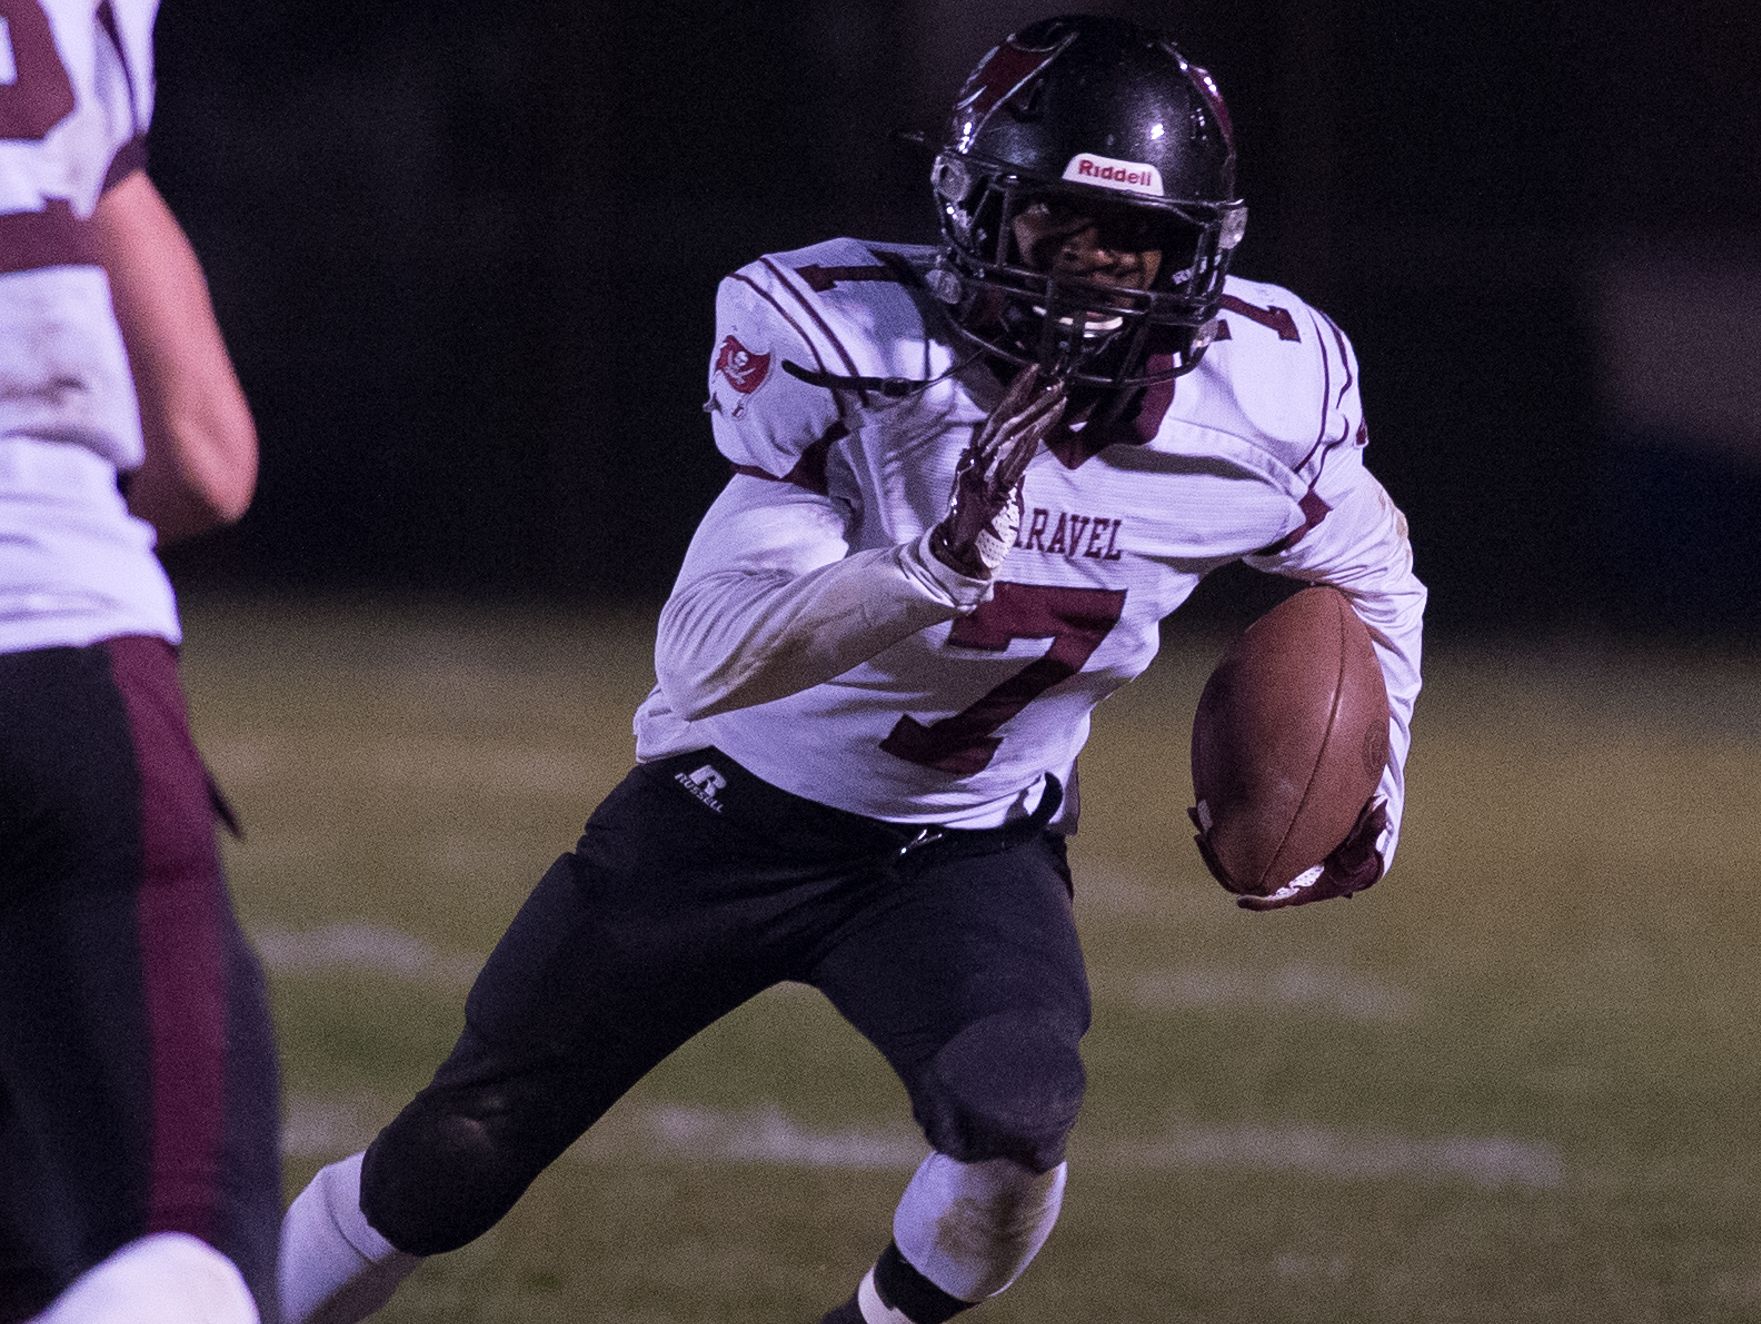 Caravel's Mandela Montgomery (7) runs the ball toward the sideline during the second quarter against Glasgow in the opening round of the DIAA Division II playoffs at Glasgow High School.